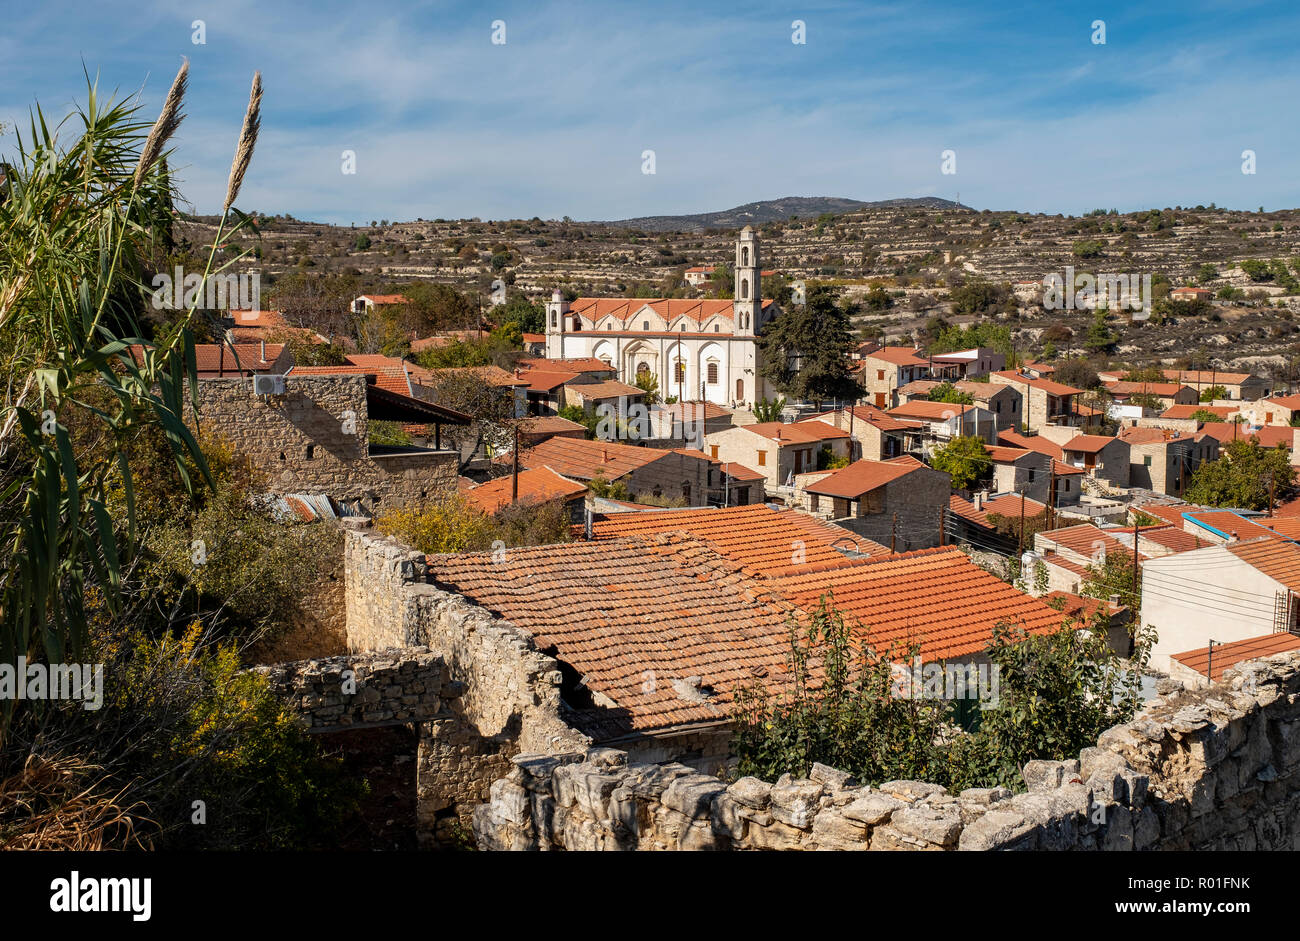 Picturesque village of Lofou situated in the Troodos mountains, Cyprus Stock Photo